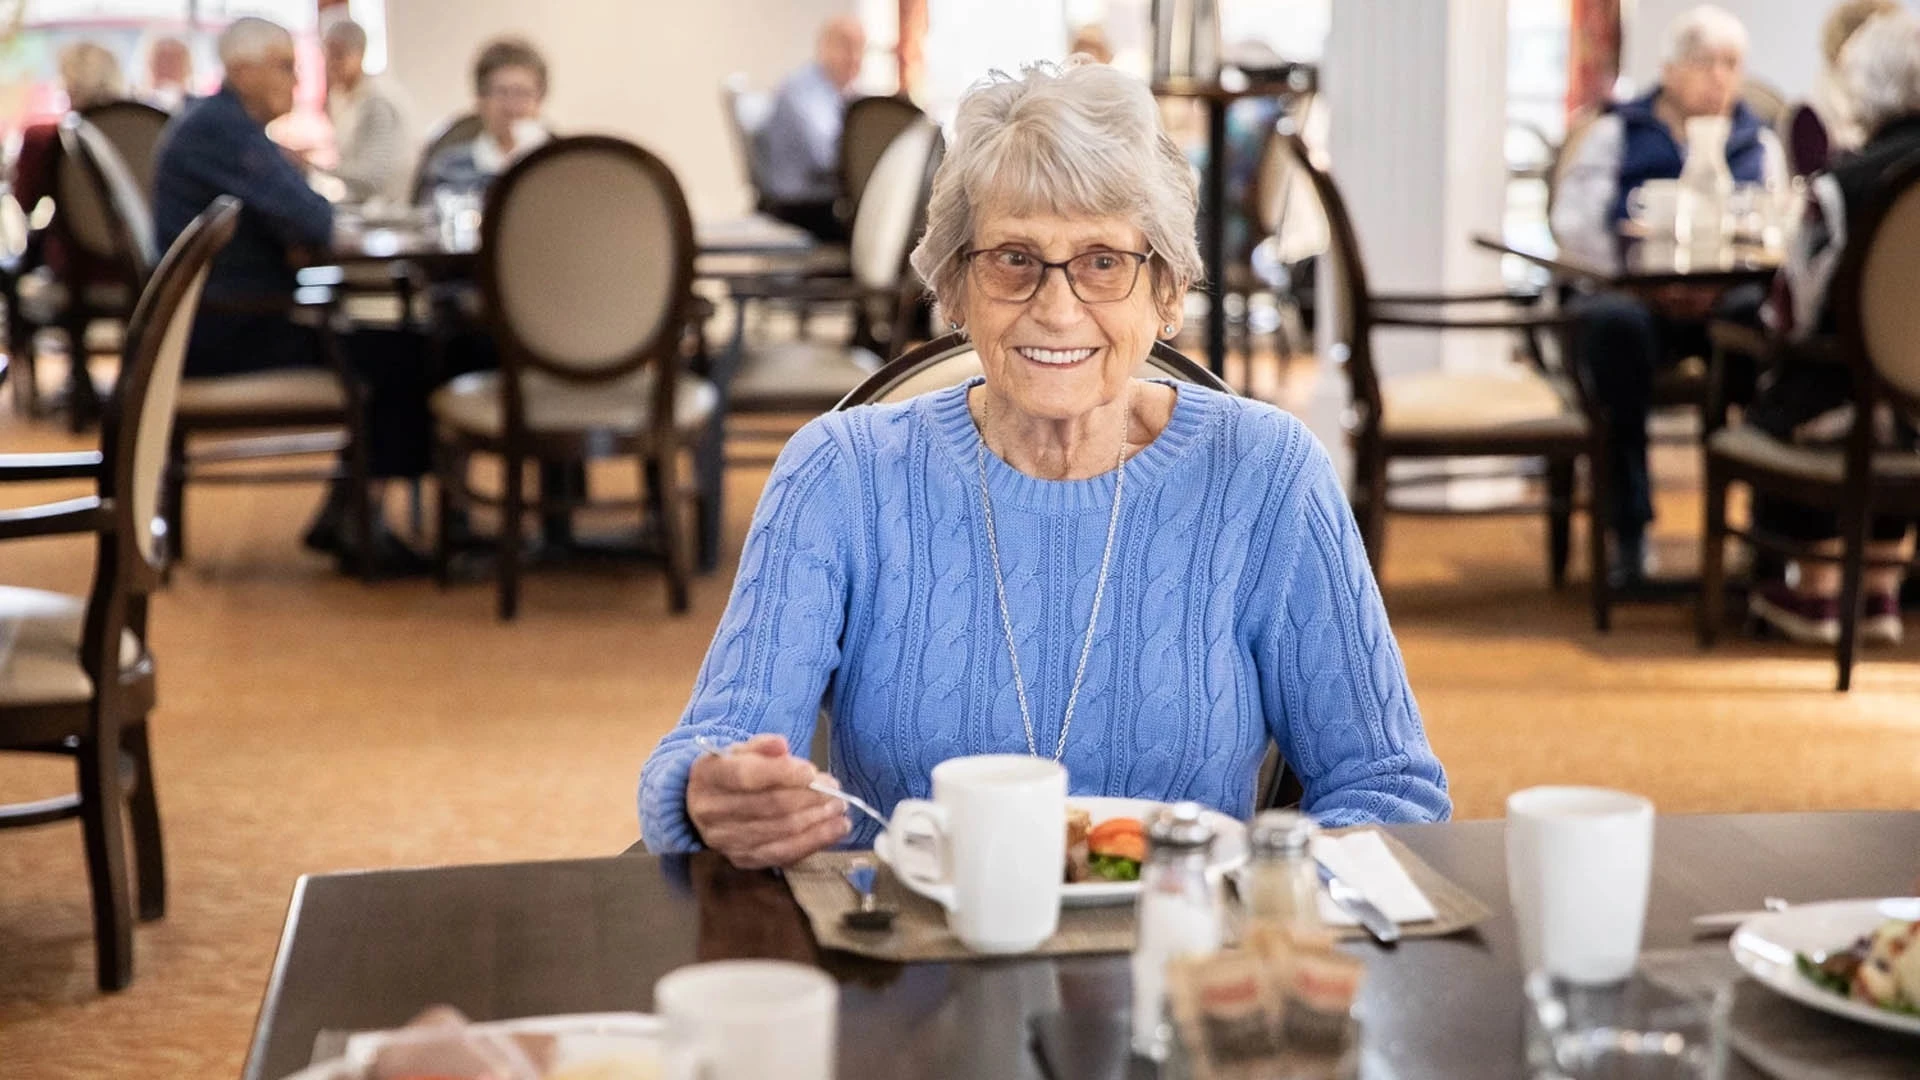 An older woman sitting at a table in a dining room.